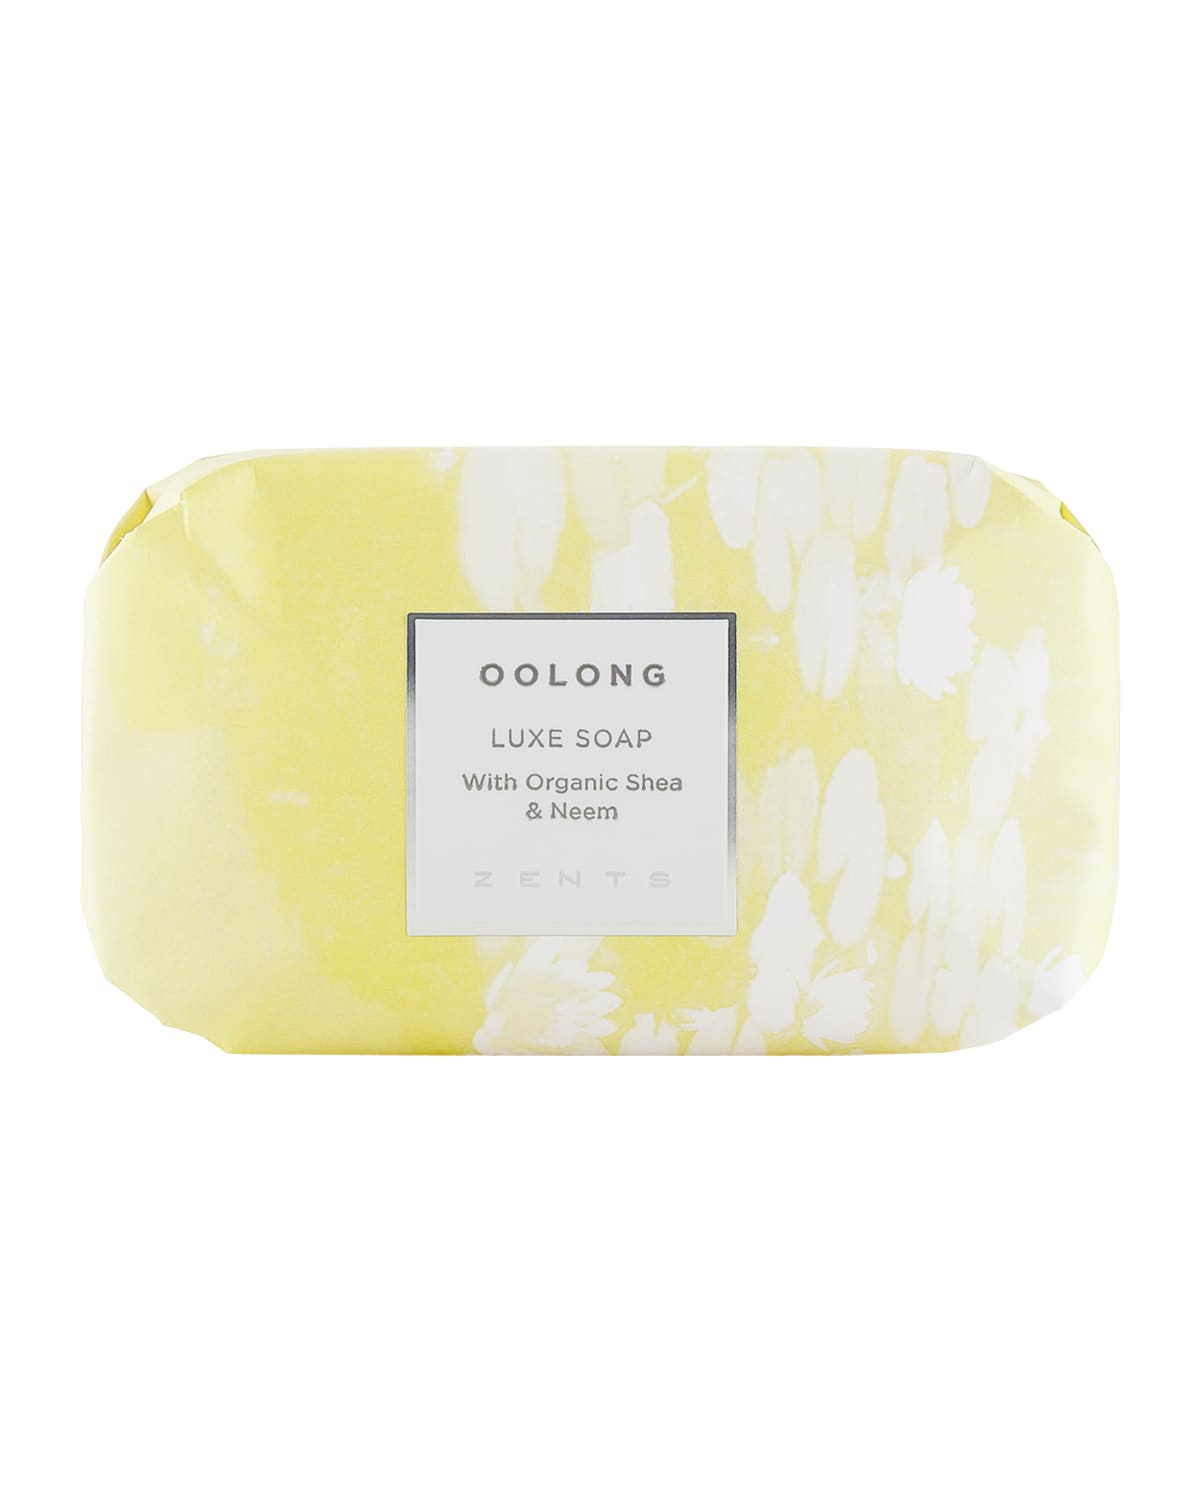 5.7 oz. Oolong Luxe Soap